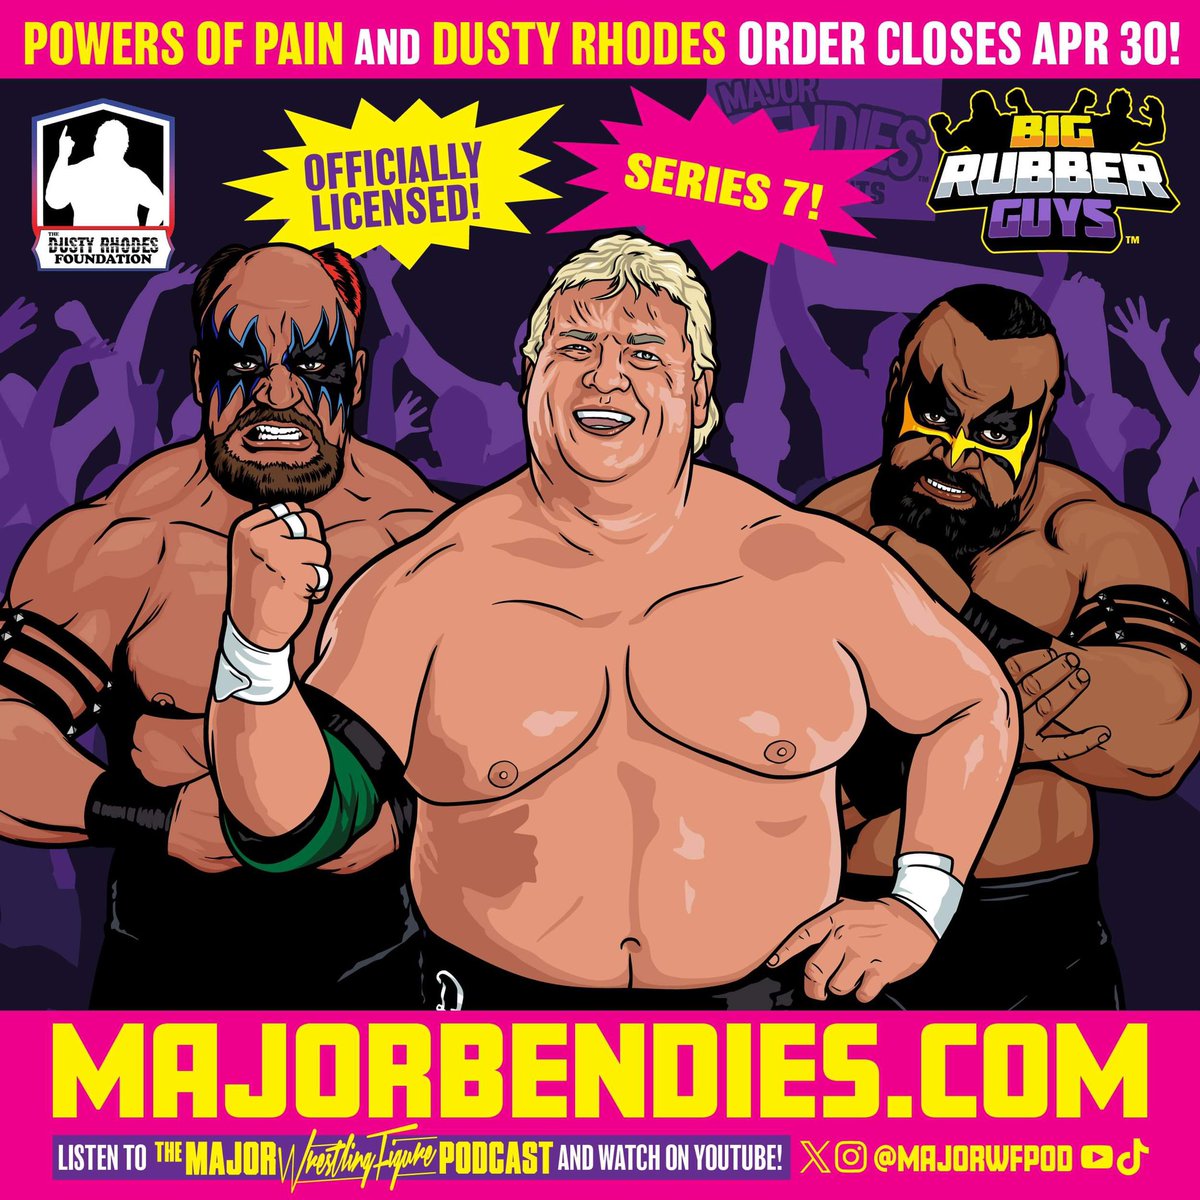 Here is a look at the packaging art for Dusty Rhodes and Powers of Pain #BigRubberGuys. We are in our final full week to get your orders in at MajorBendies.com before they’re no longer available at the lowest price possible. #ScratchThatFigureItch